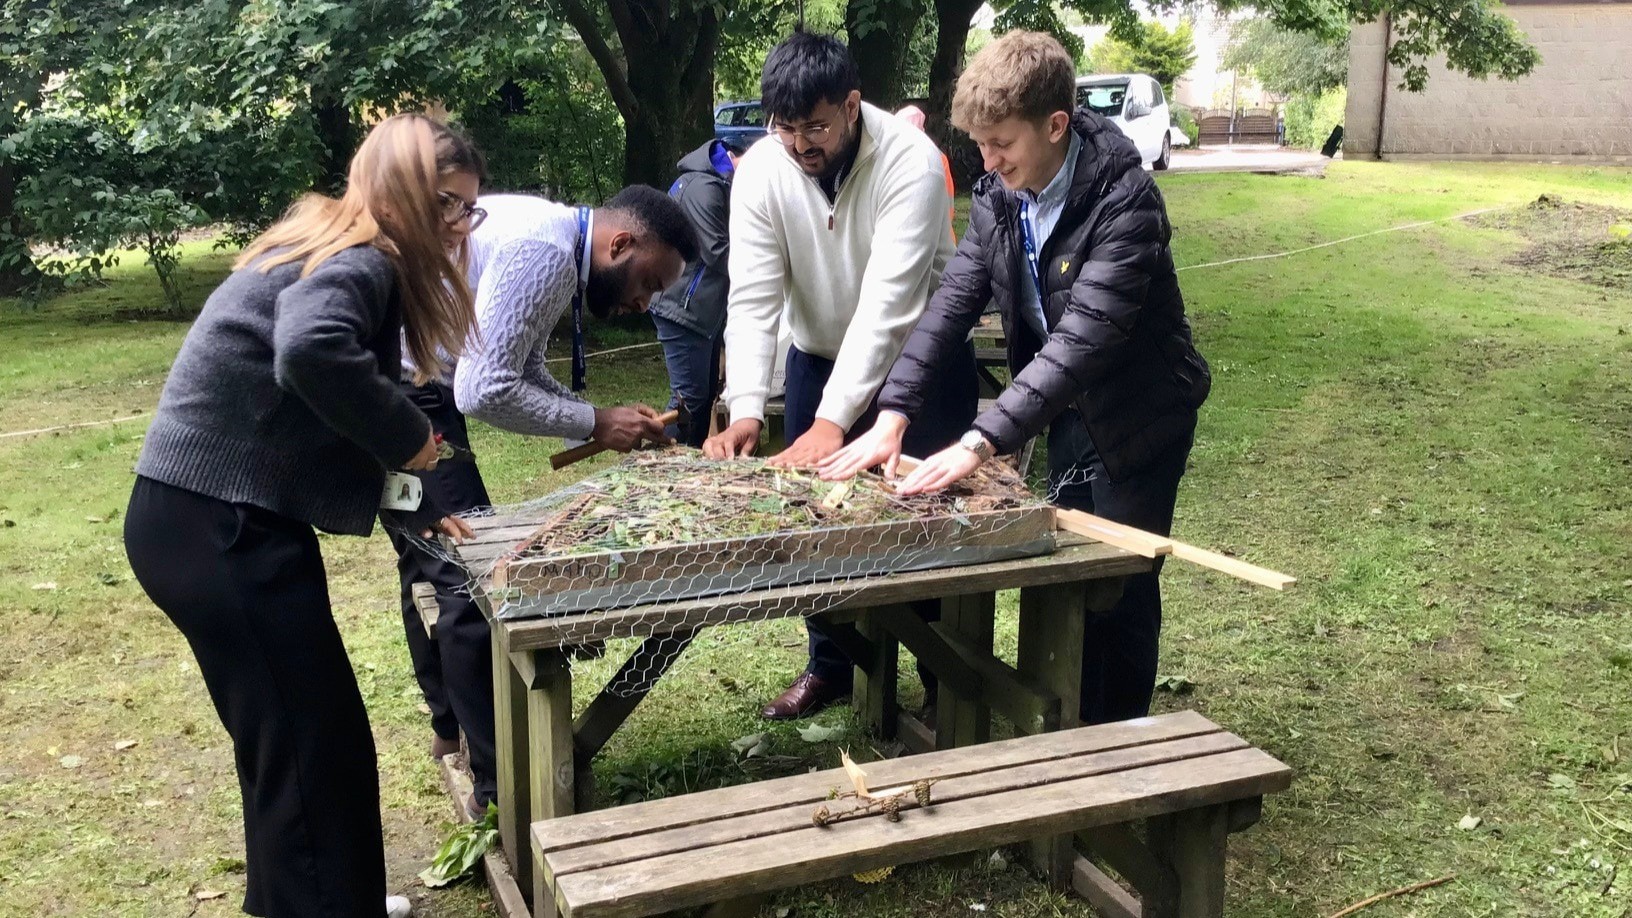 Image shows Northern employees creating bug hotel